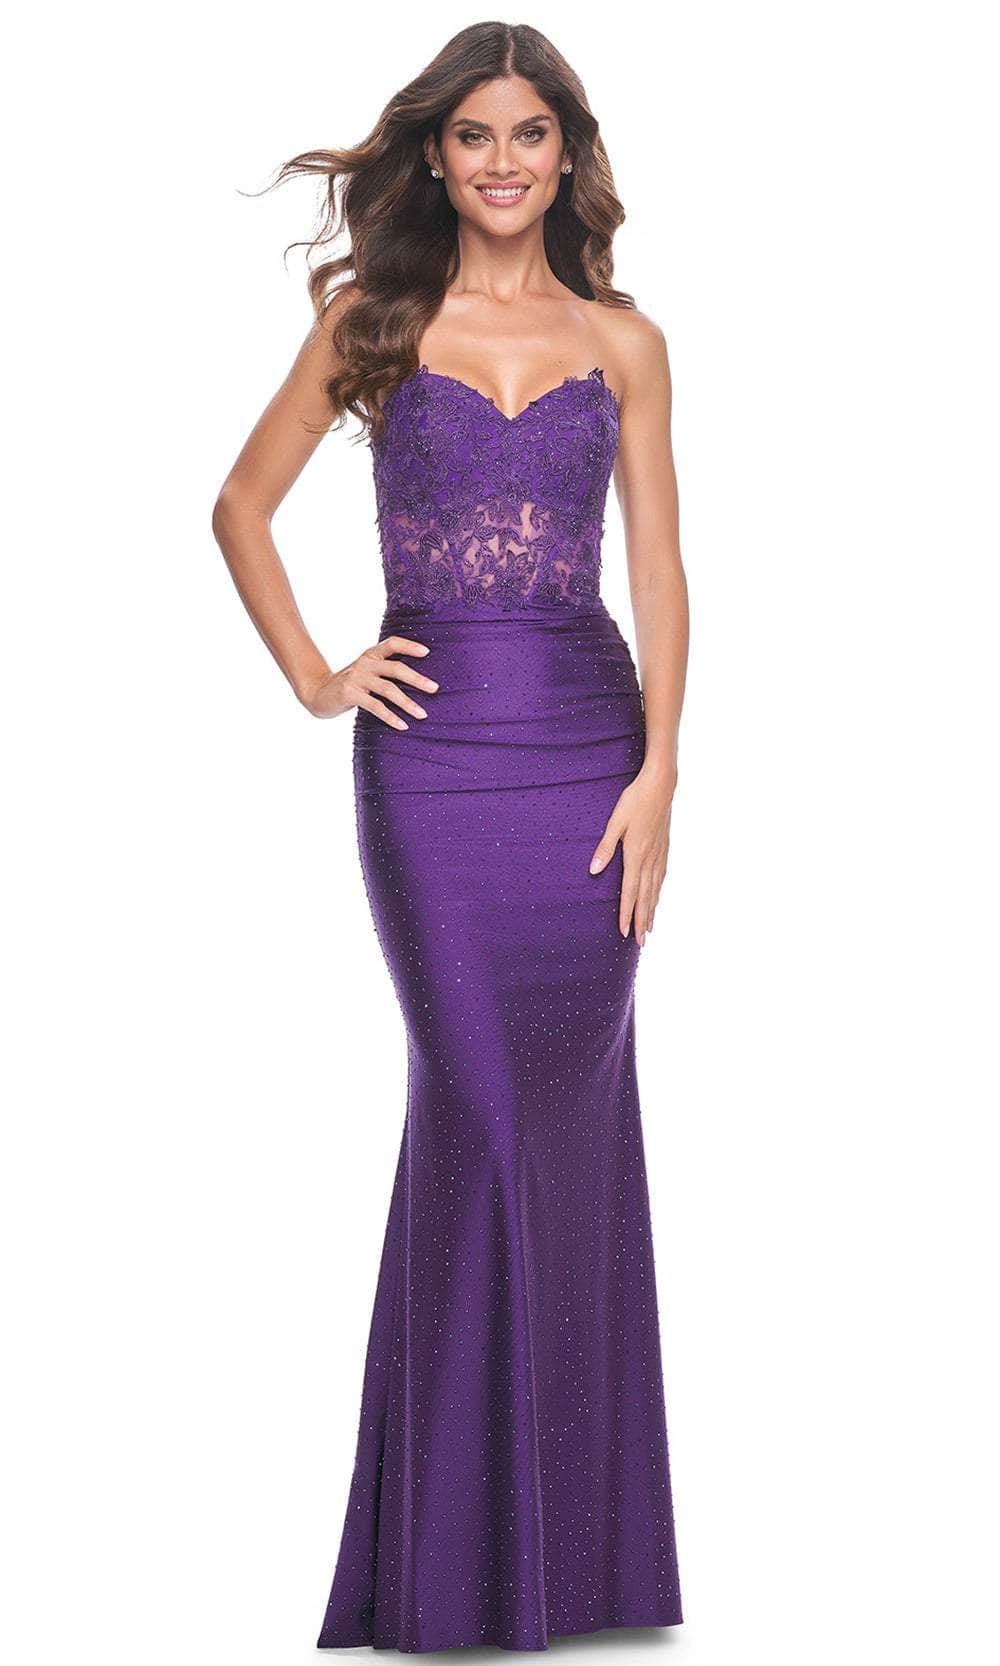 Image of La Femme 32254 - Embroidered Corset Strapless Prom Gown